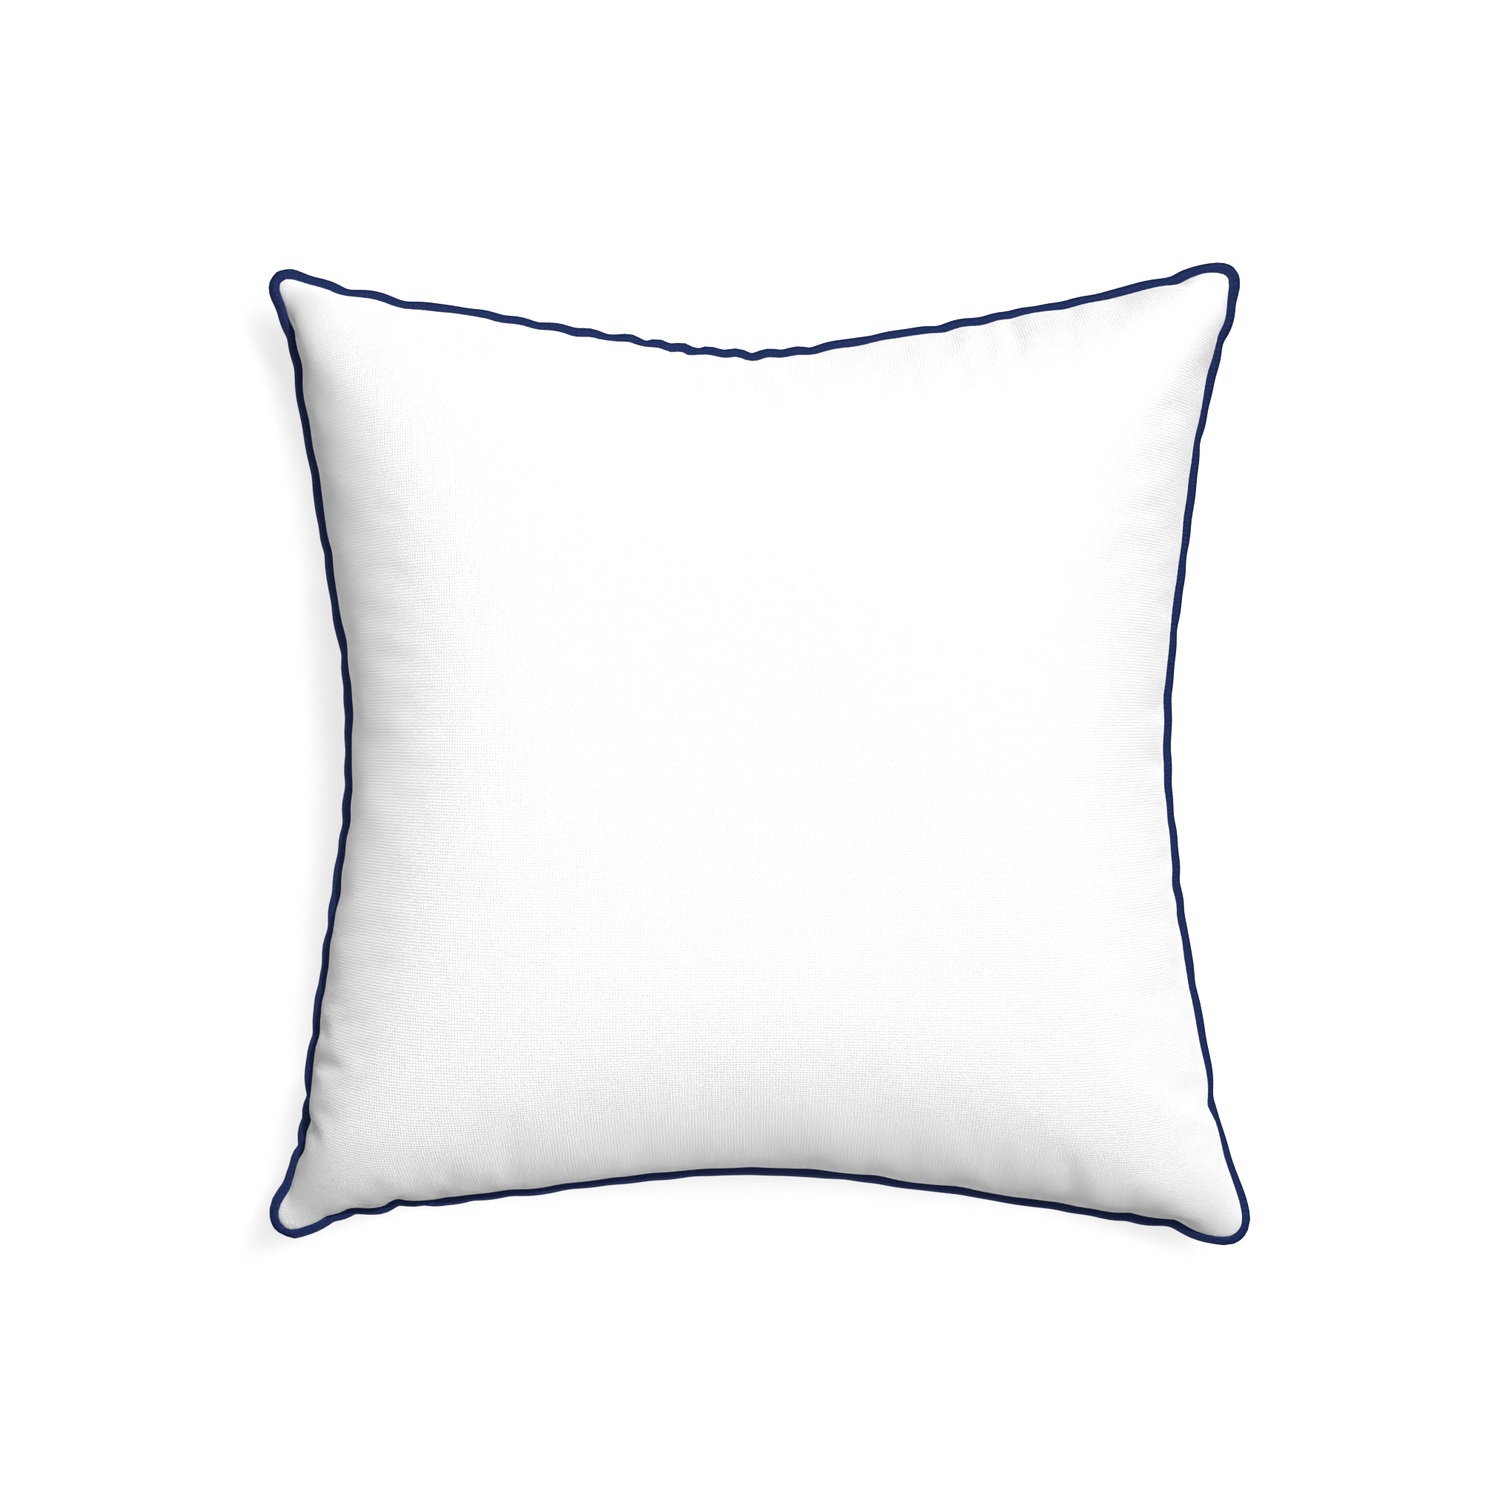 22-square snow custom white cottonpillow with midnight piping on white background